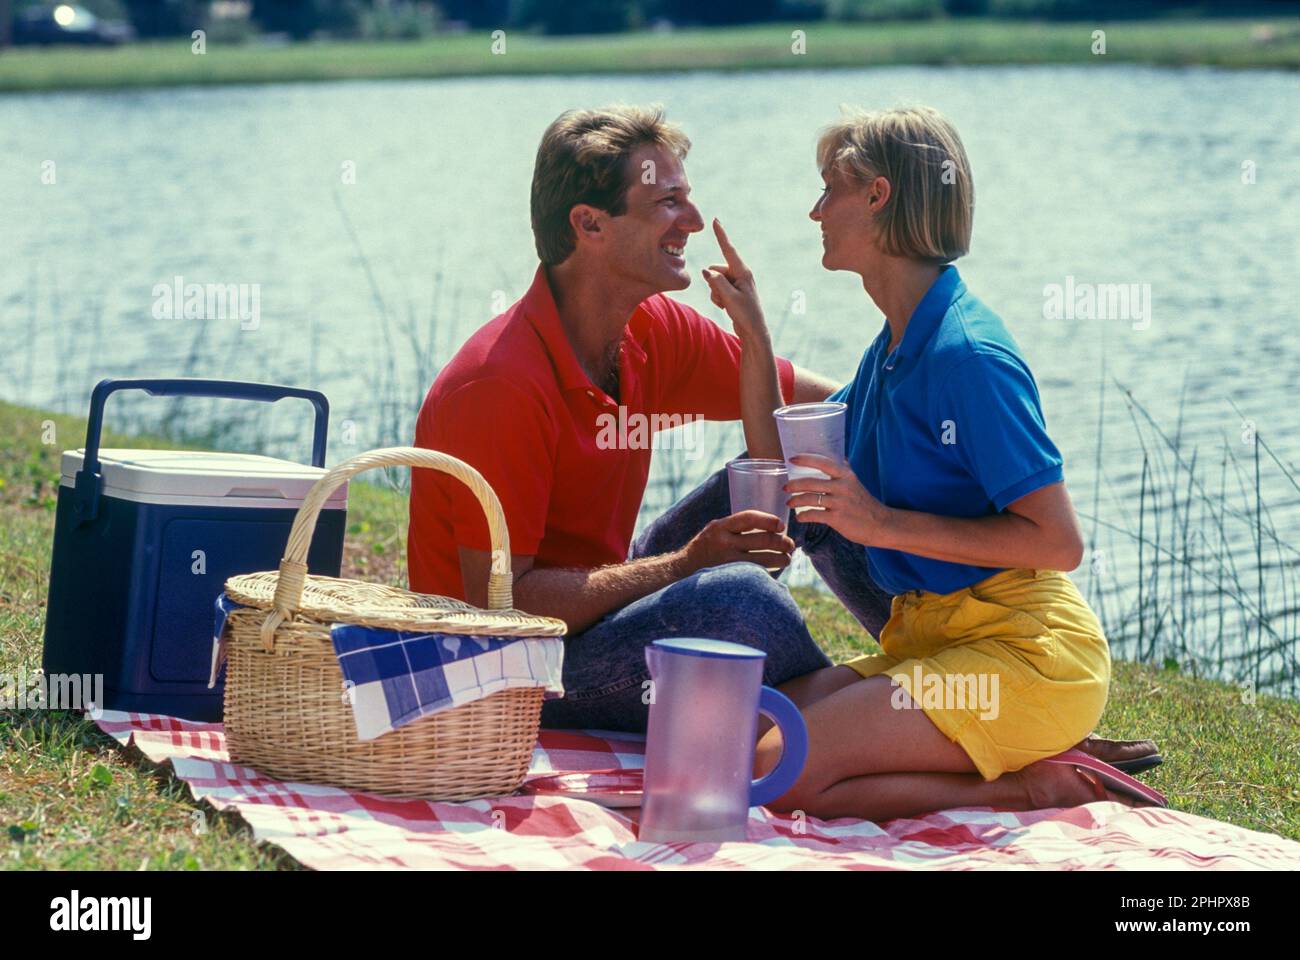 1990 HISTORICAL YOUNG COUPLE SITTING PICNIC ON BLANKET BY WATER Stock Photo